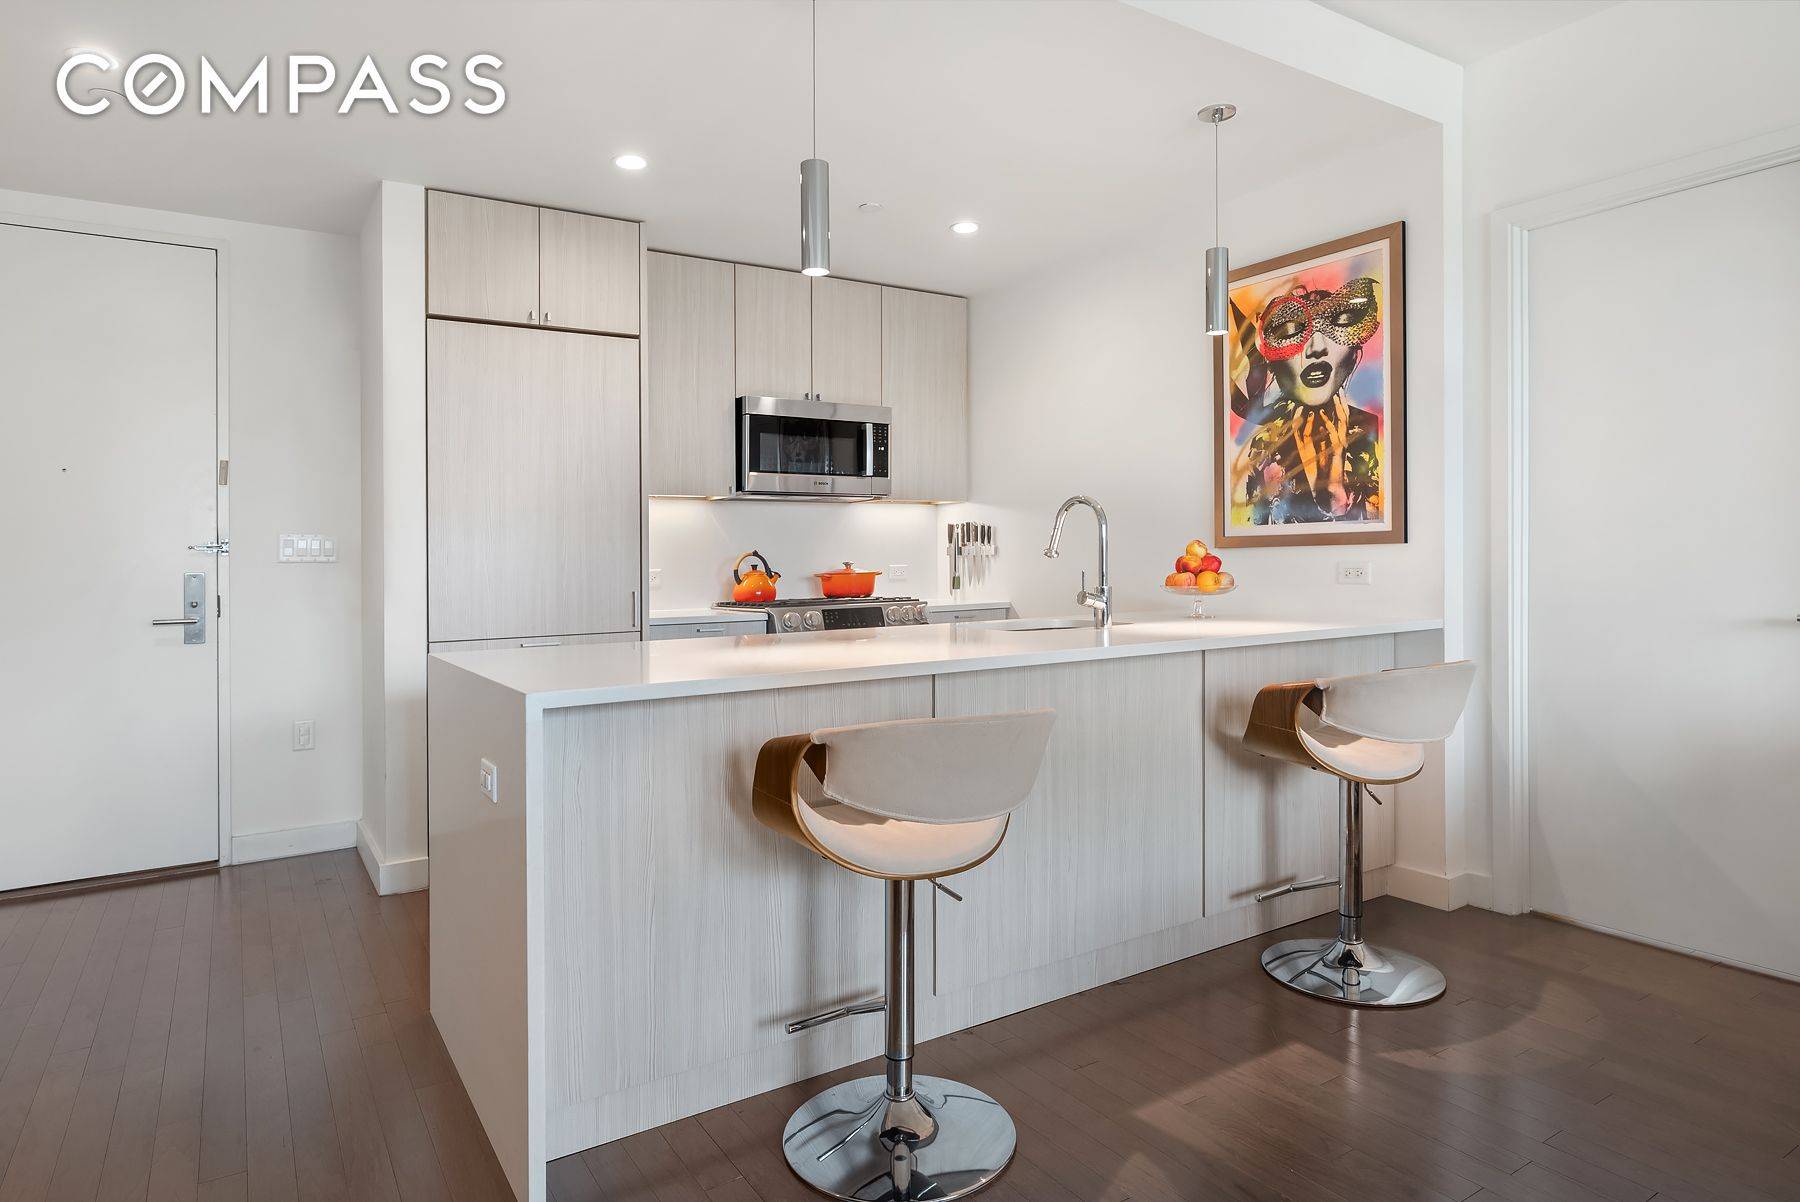 New to the market, spacious 2BR 2BA condo with storage and tax abatement overlooking Manhattan from picture windows in every room plus a 125 sq ft.